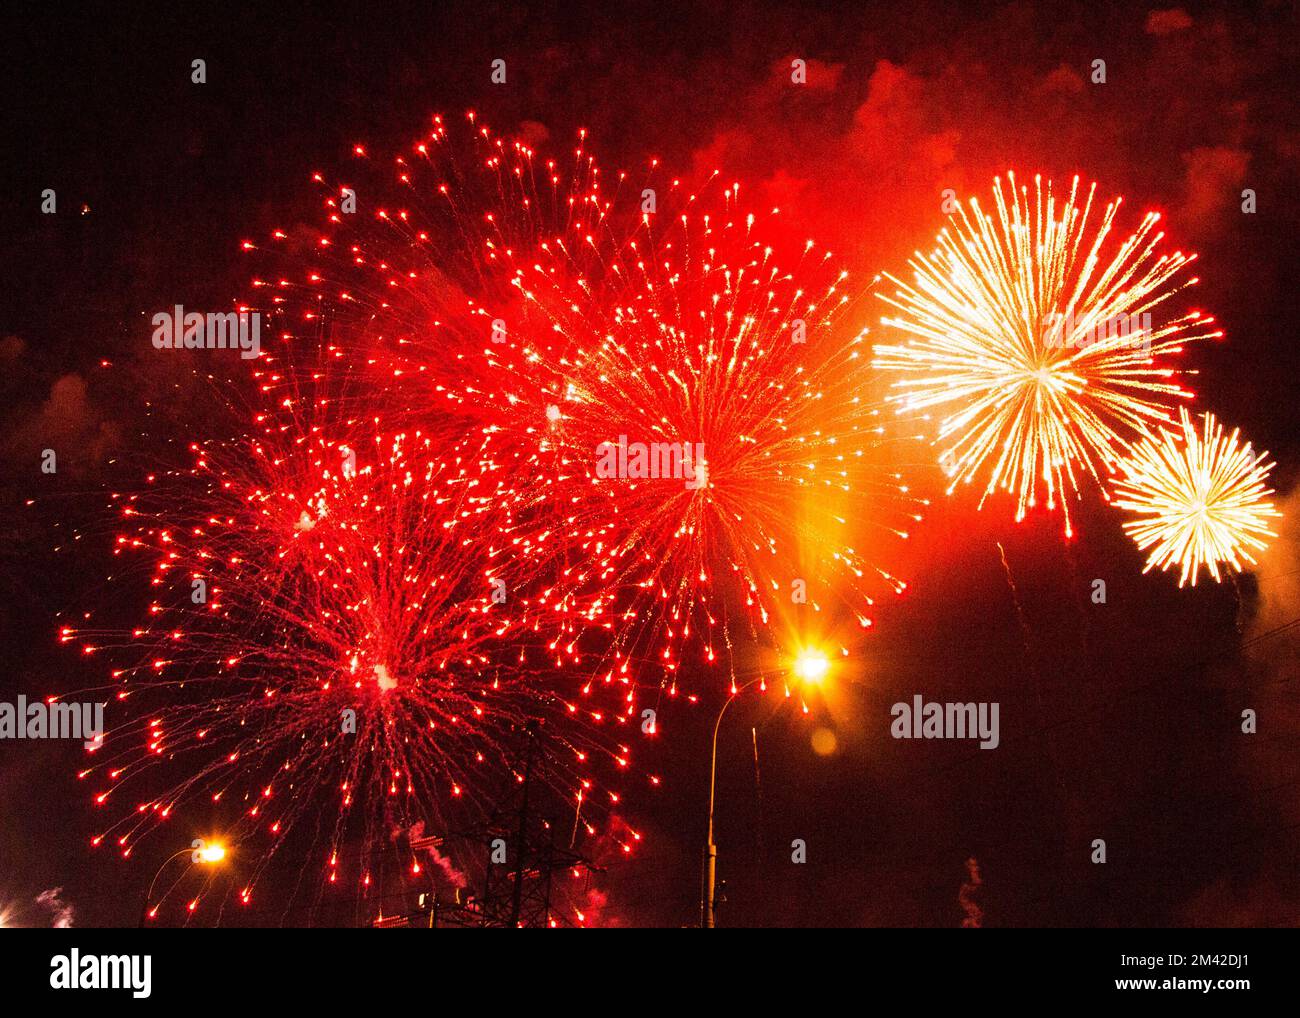 brigh tmulti-colored fireworks in the night sky Stock Photo